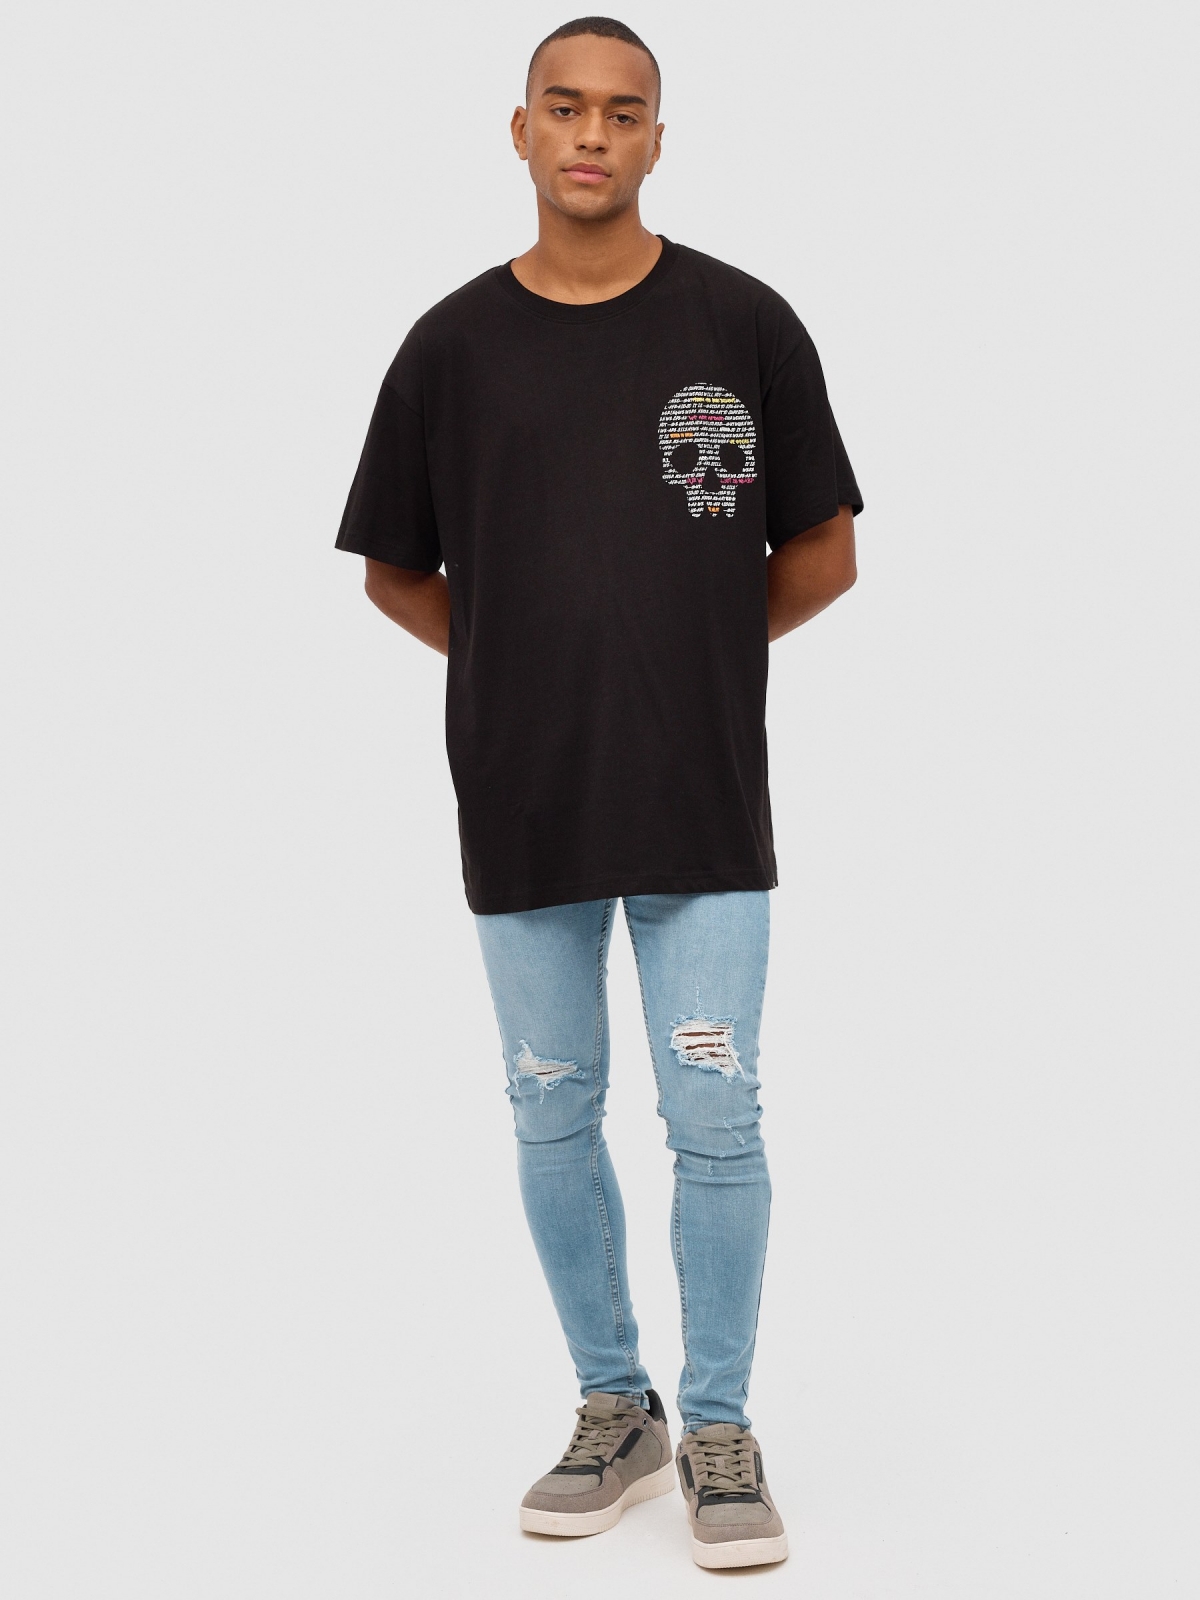 Oversize text skull t-shirt black front view